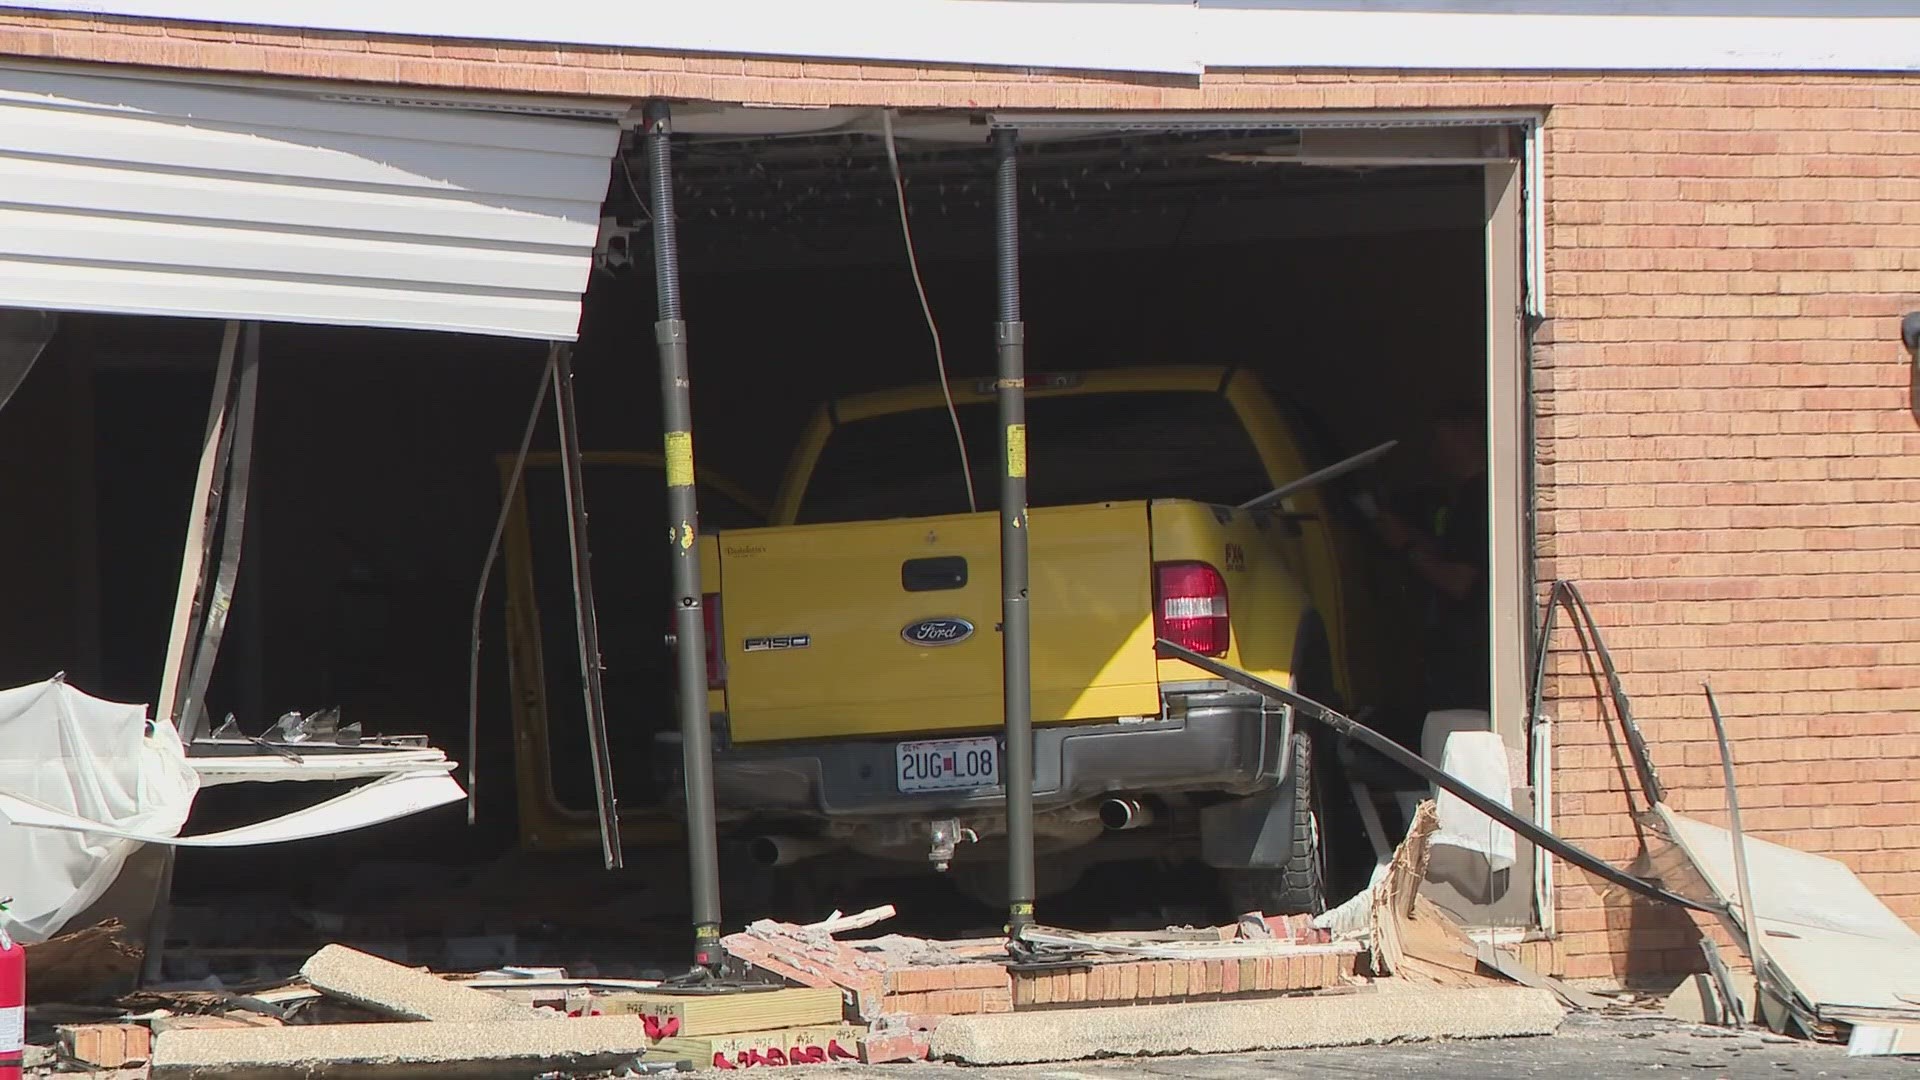 A yellow pickup truck was crashed into the Emerson Unitarian Universalist Chapel and Community building near the intersection of N 5th Street and Jefferson Street.